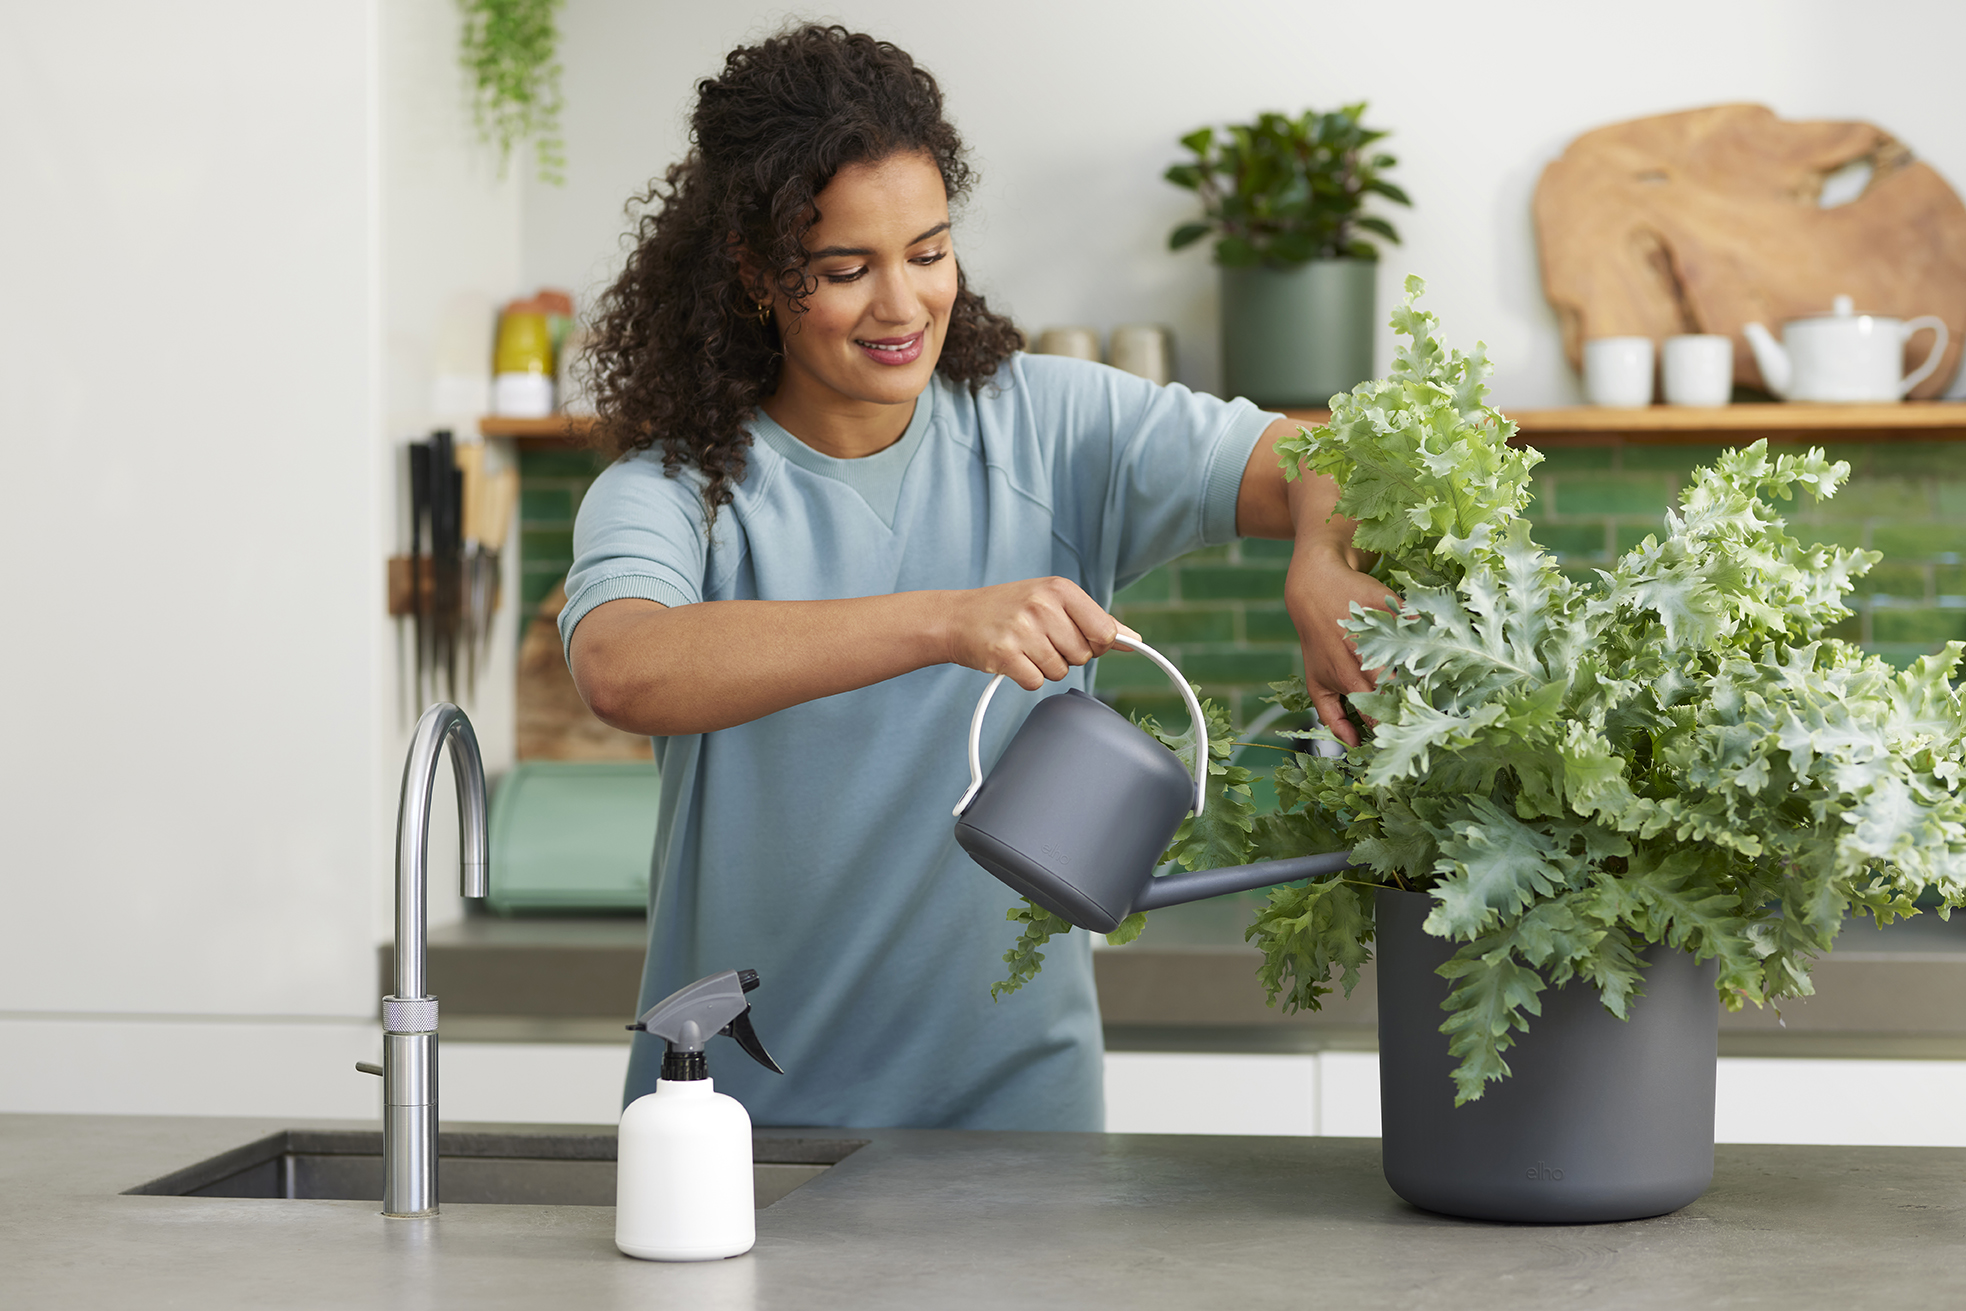 Elho's watering cans are sustainable, easy to use, available in